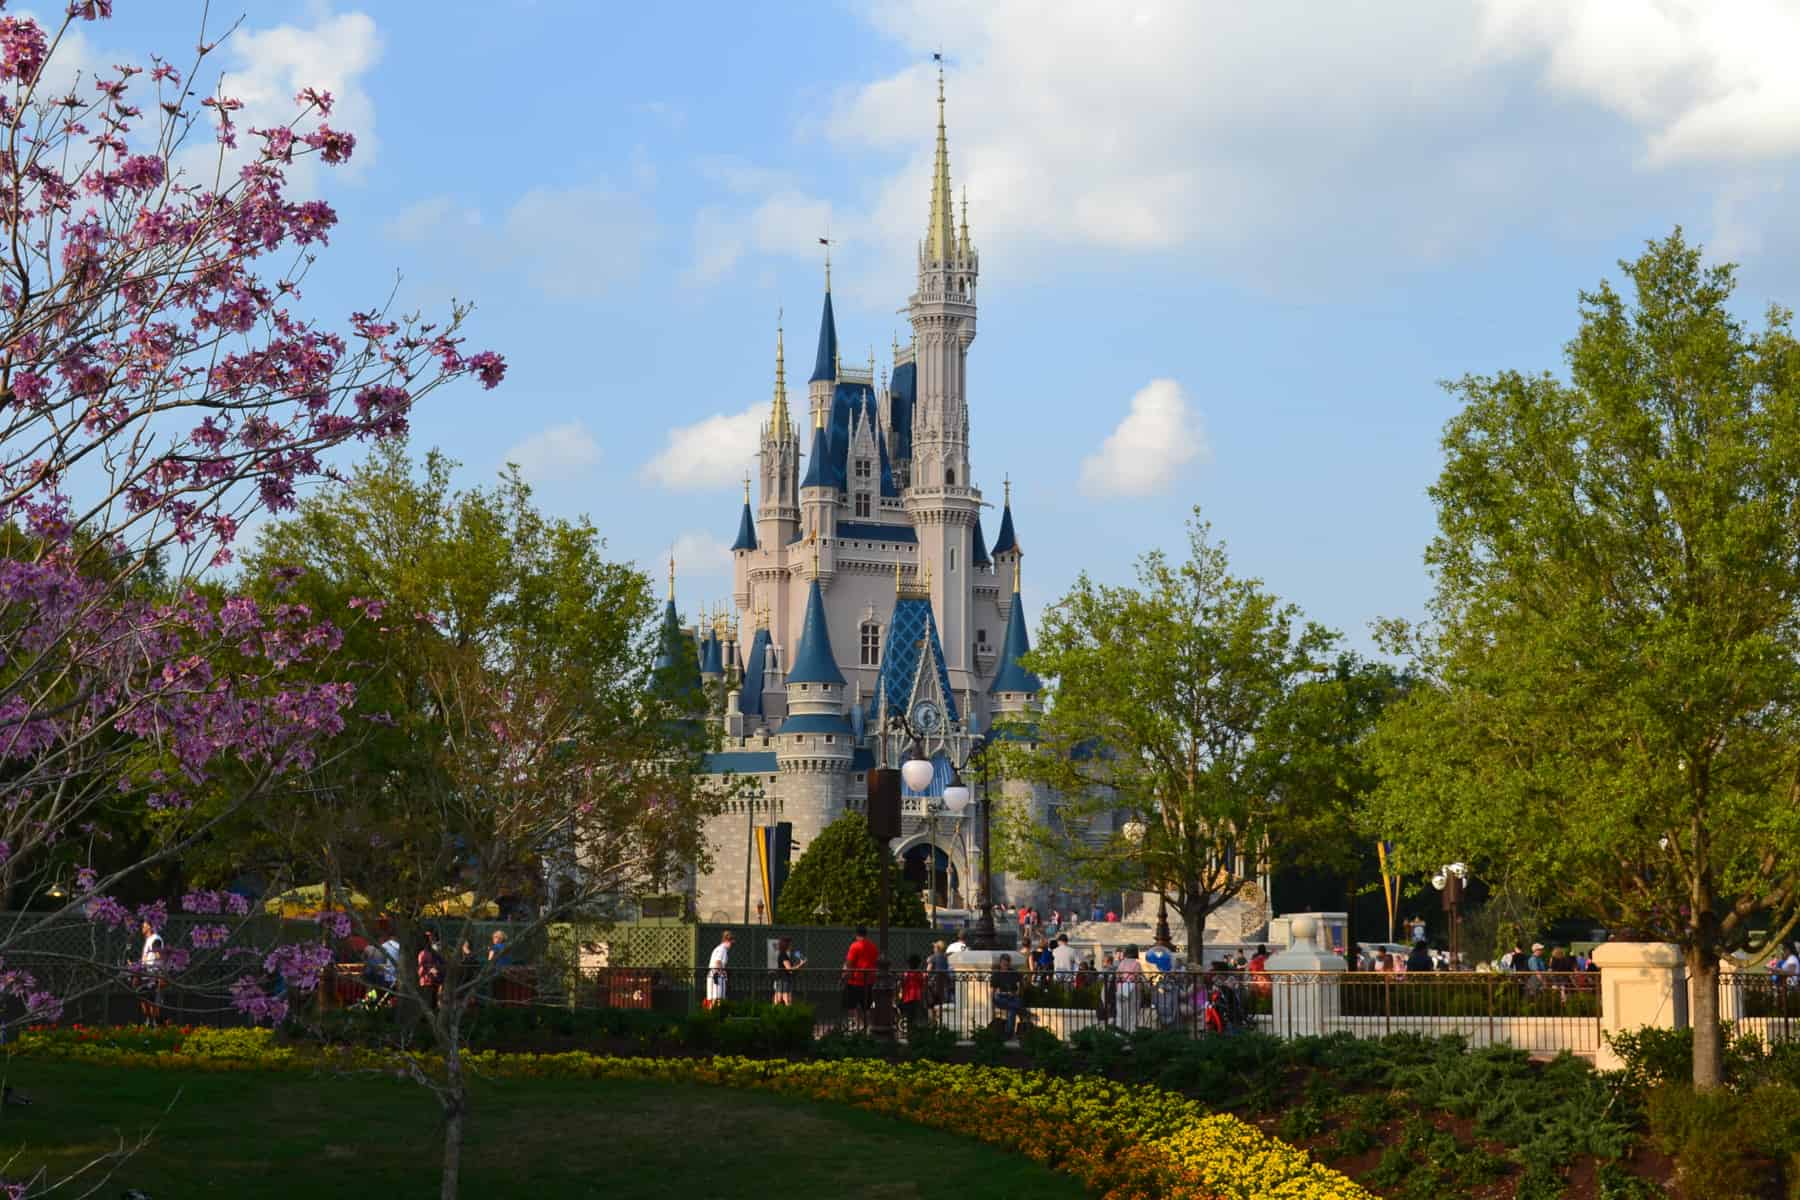 The best age for Disney World: 5 things to consider before your first trip